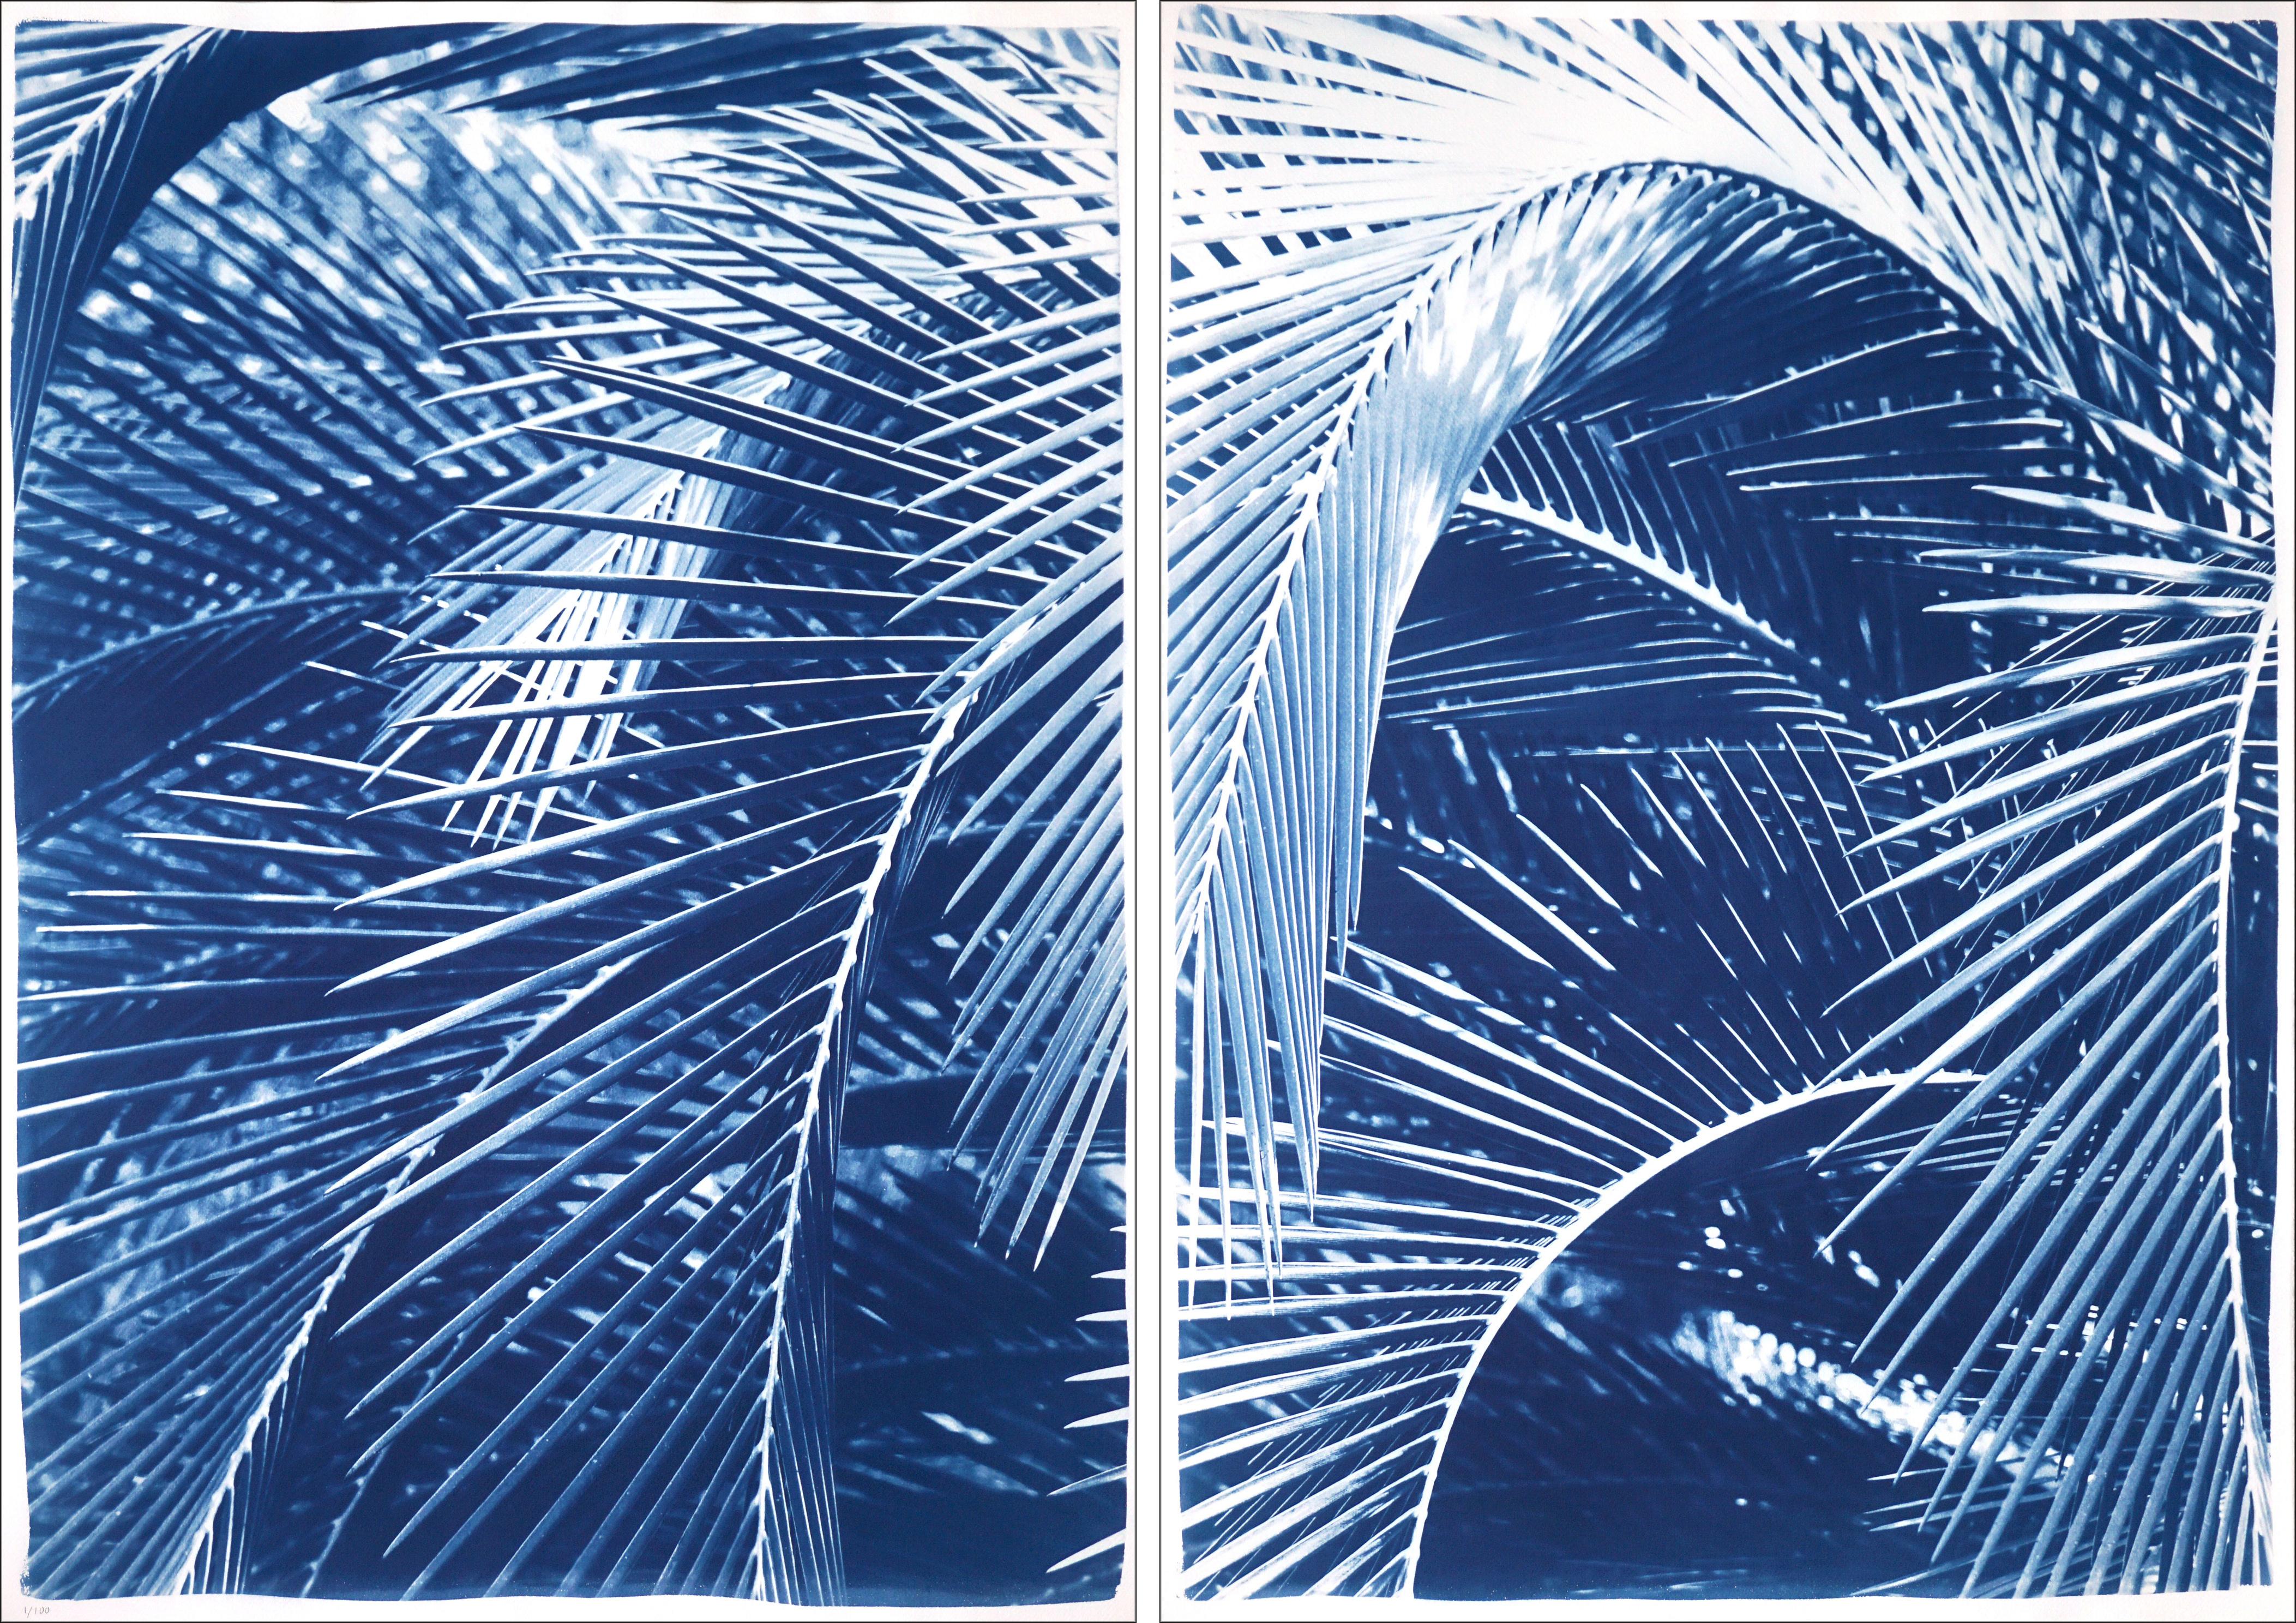 Kind of Cyan Landscape Art - Lush Palm Bushes, Botanical Diptych, Still Life in Blue Tones, Tropical Style